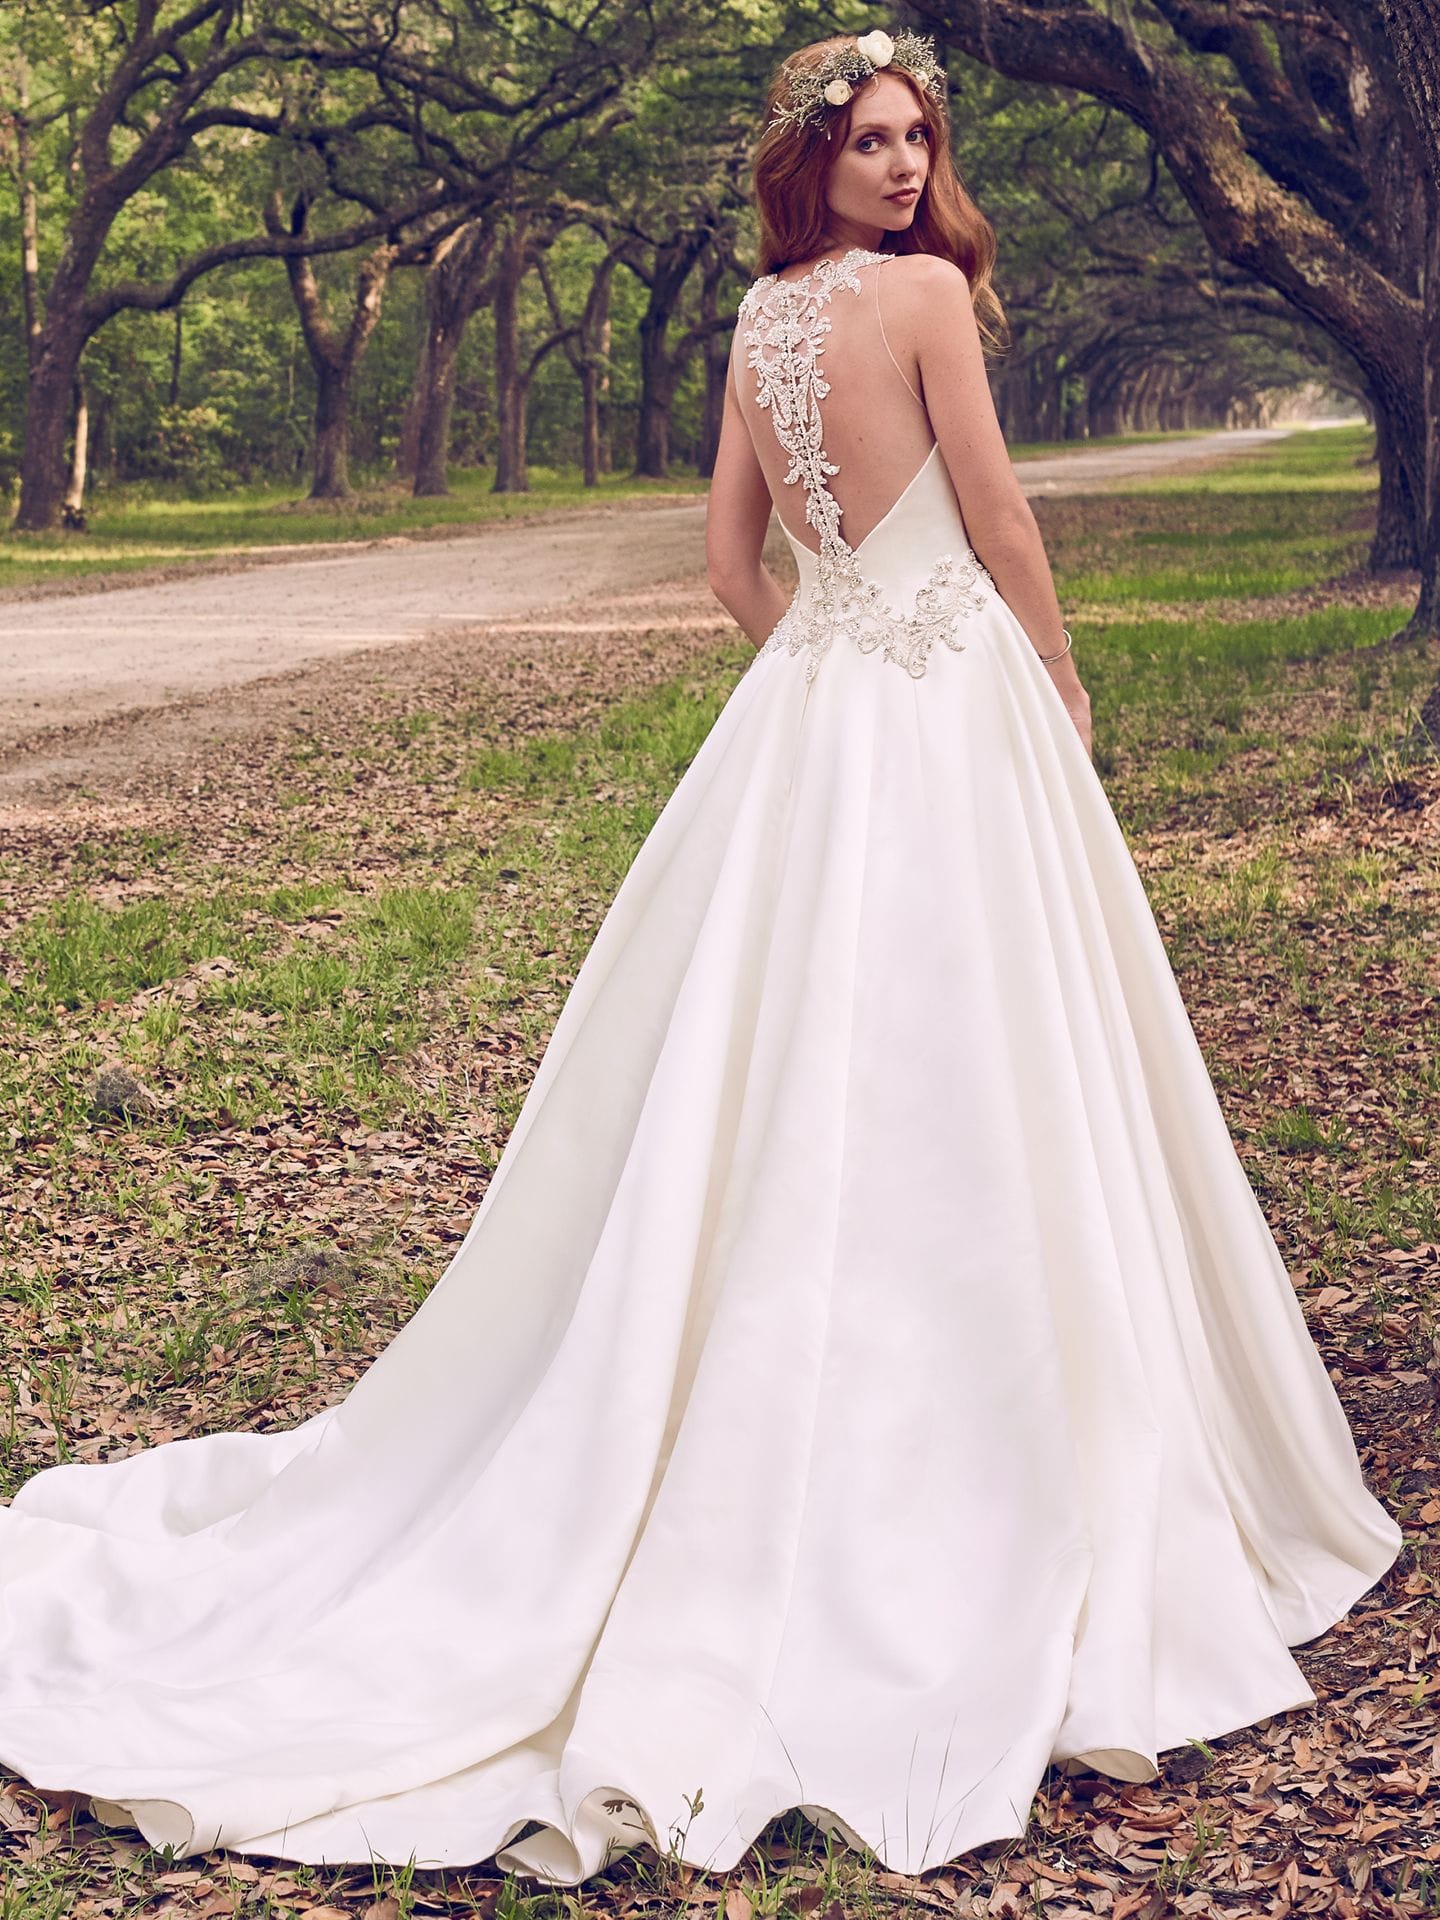 Beautiful statement-back wedding dresses from Maggie Sottero and Sottero and Midgley - Beaded lace motifs and Swarovski crystals adorn the waistline and illusion open back in this Gala Satin wedding dress. Corianne by Maggie Sotter.